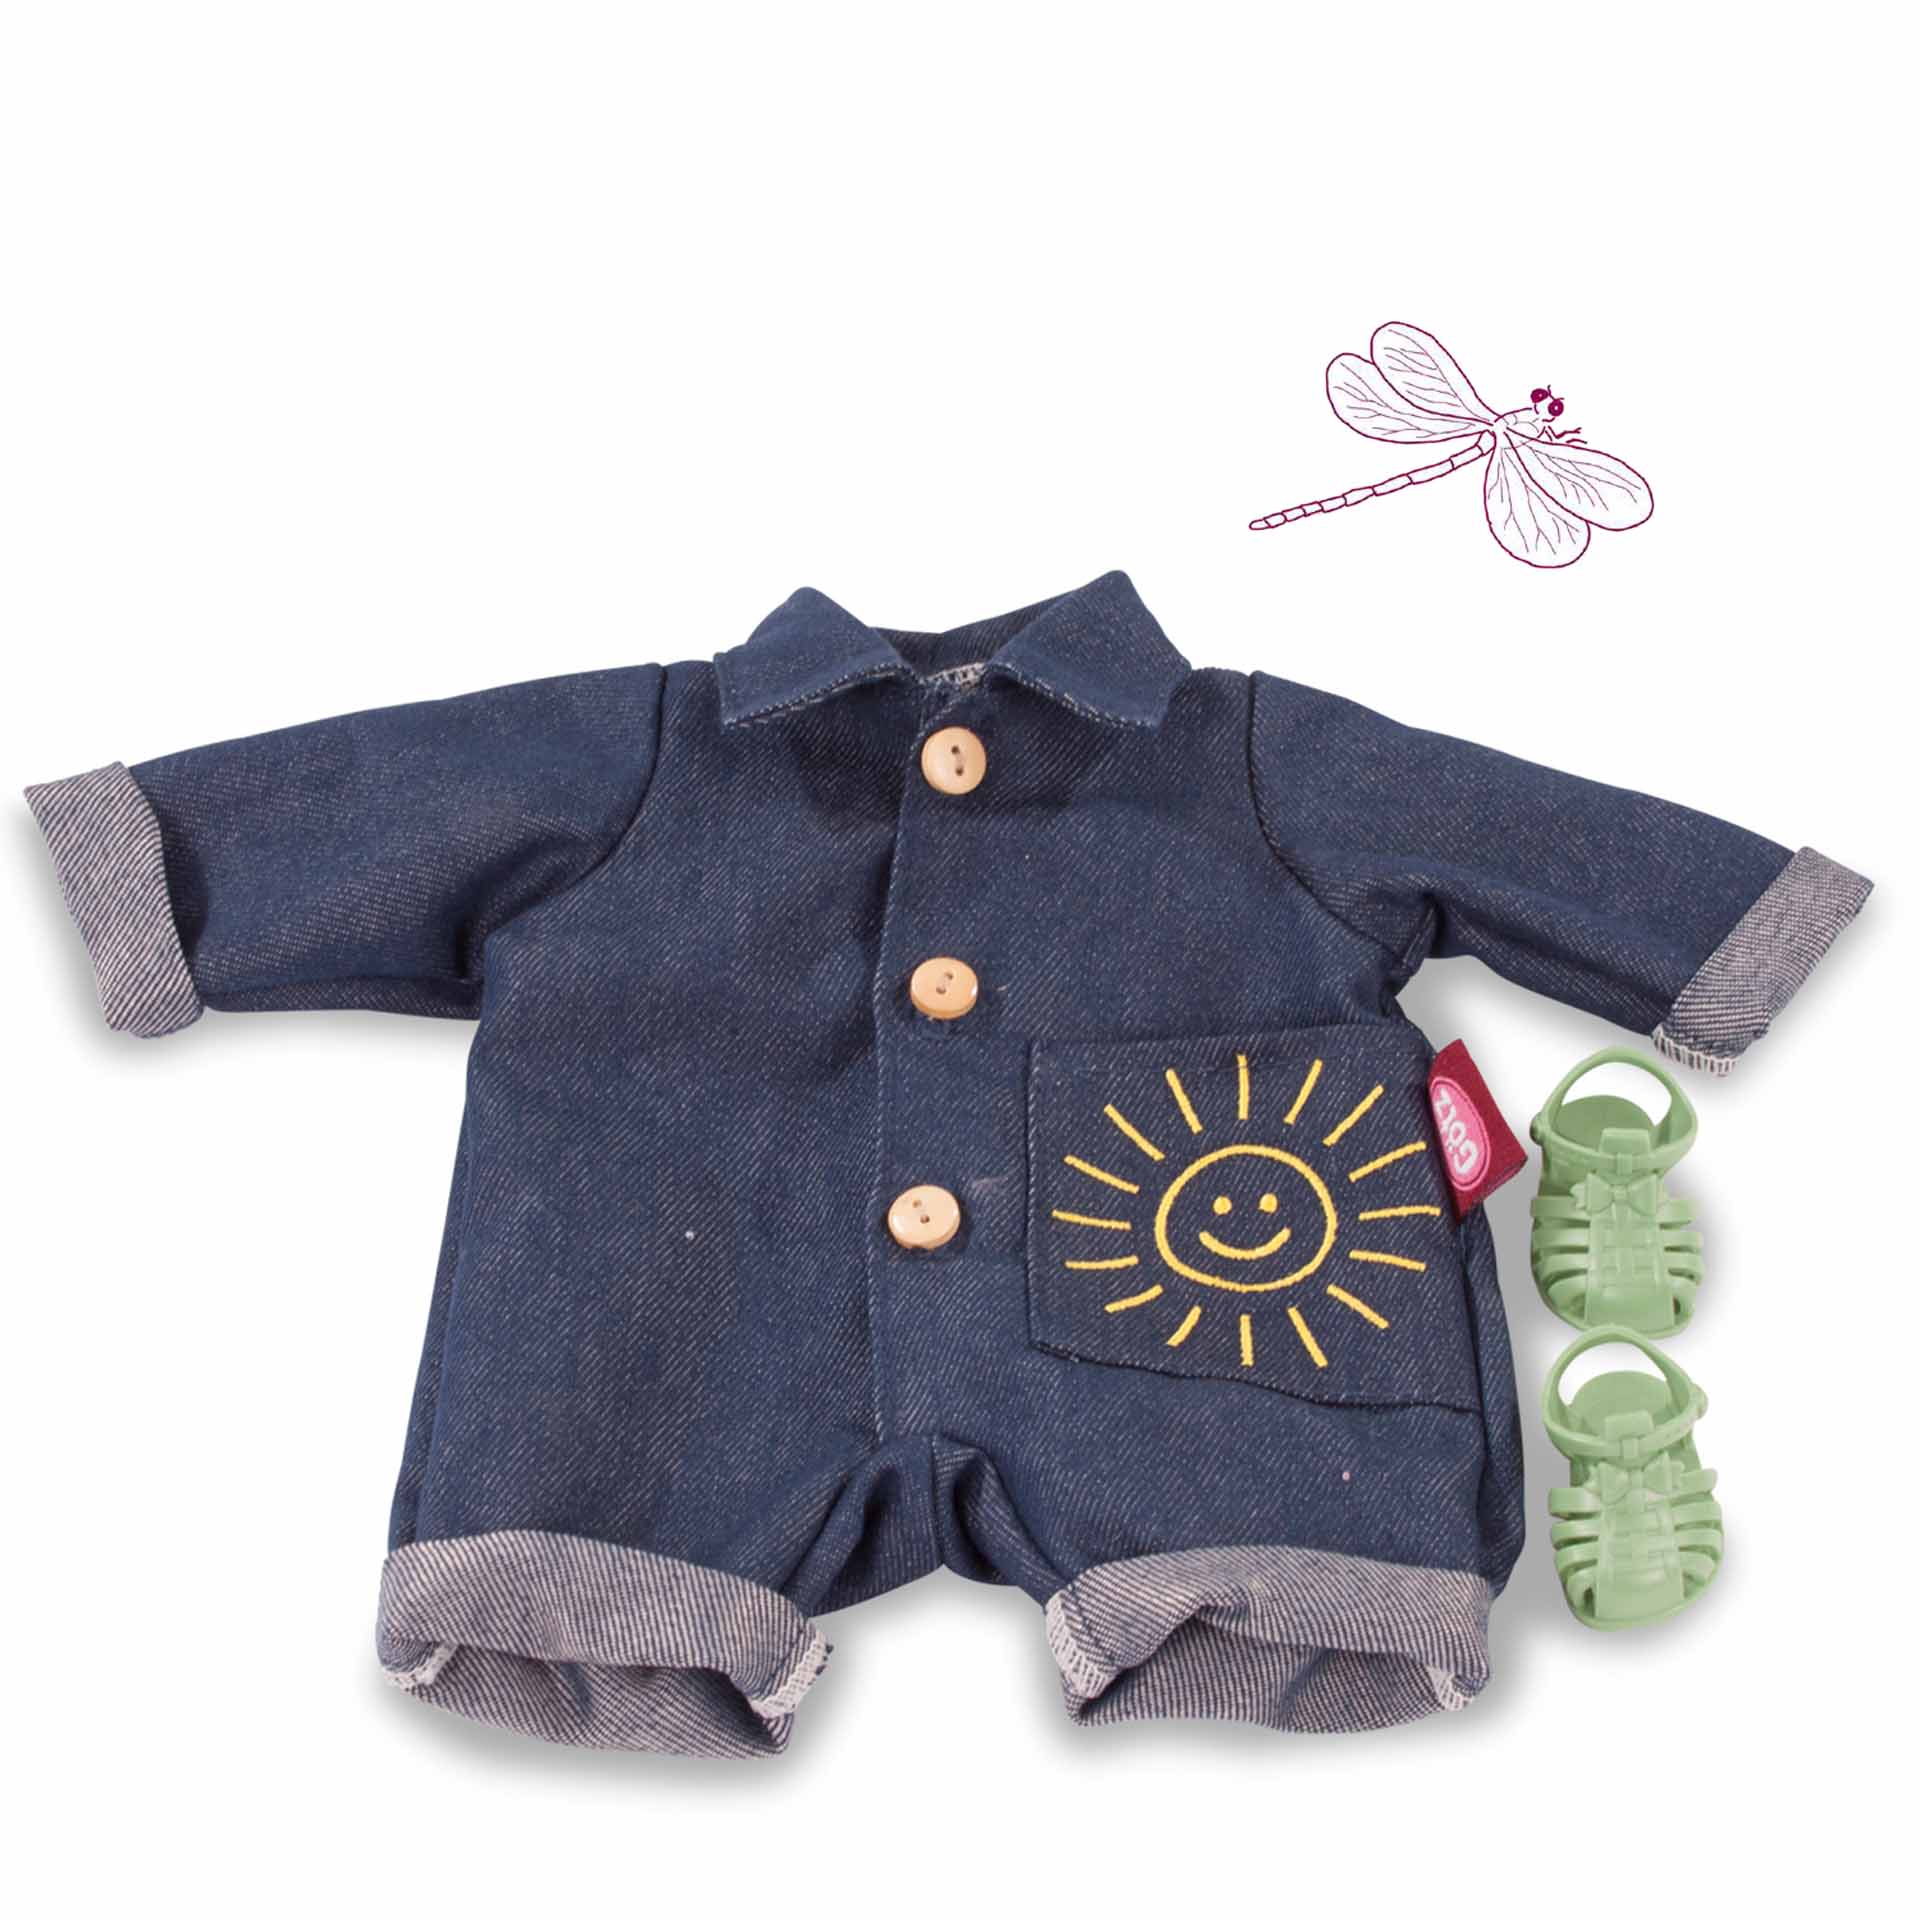 Baby suit Sunny Day size S